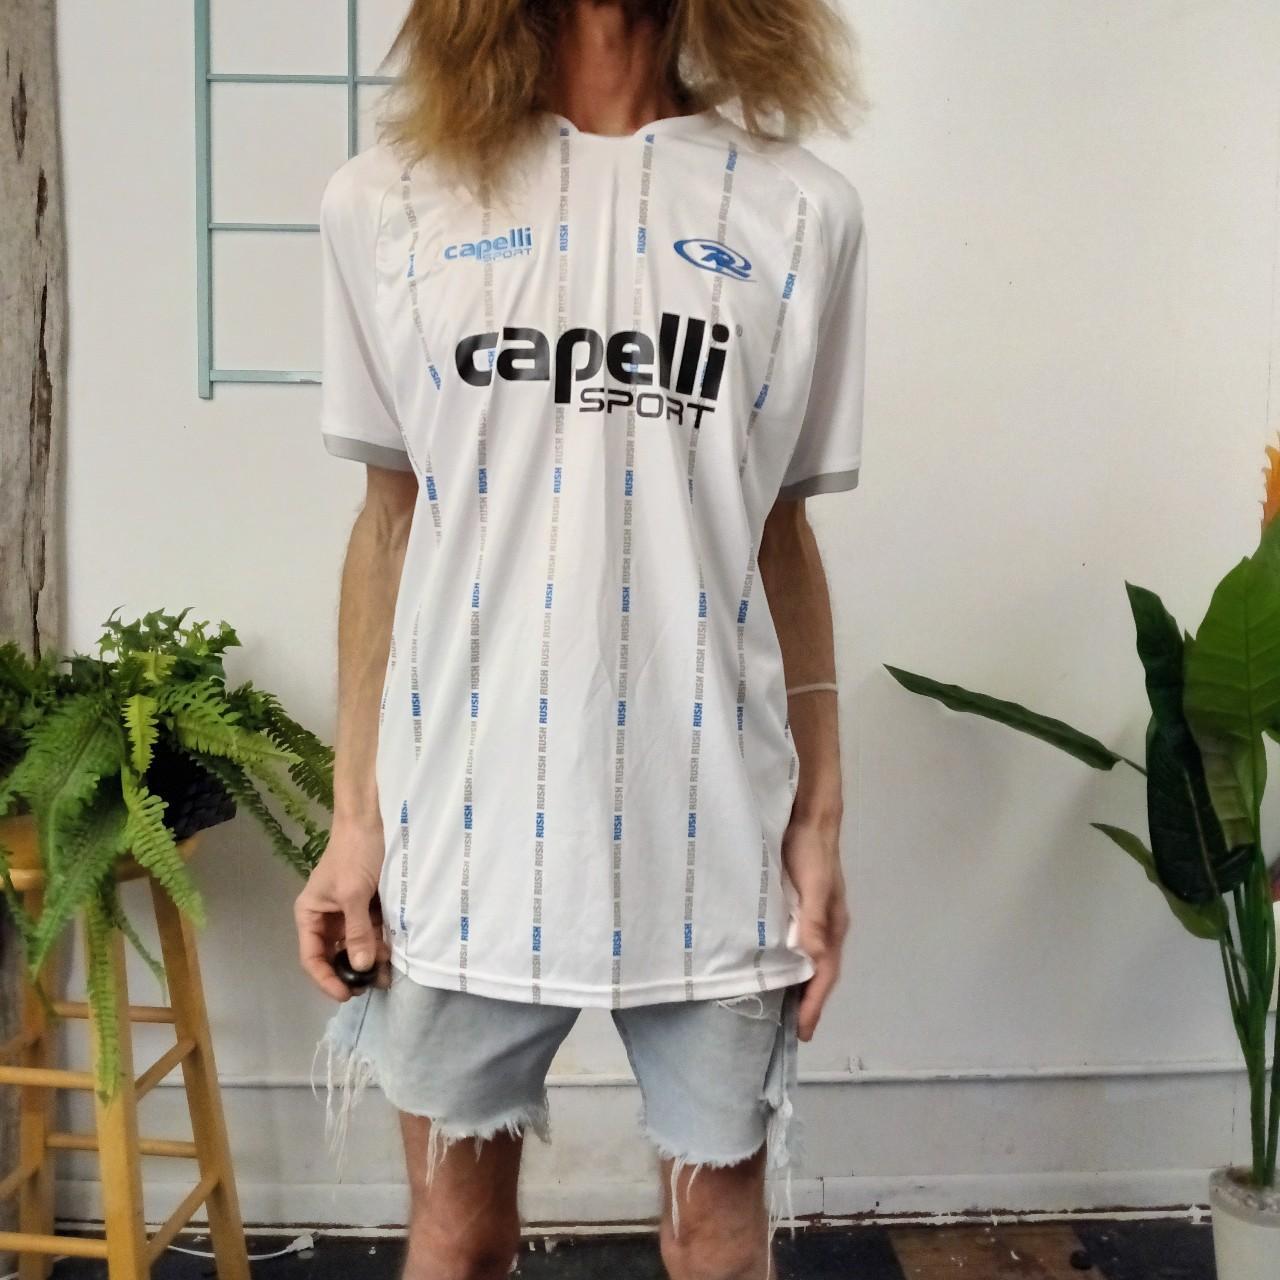 Capelli Sport eminently - Depop soccer to its... jersey, sporty